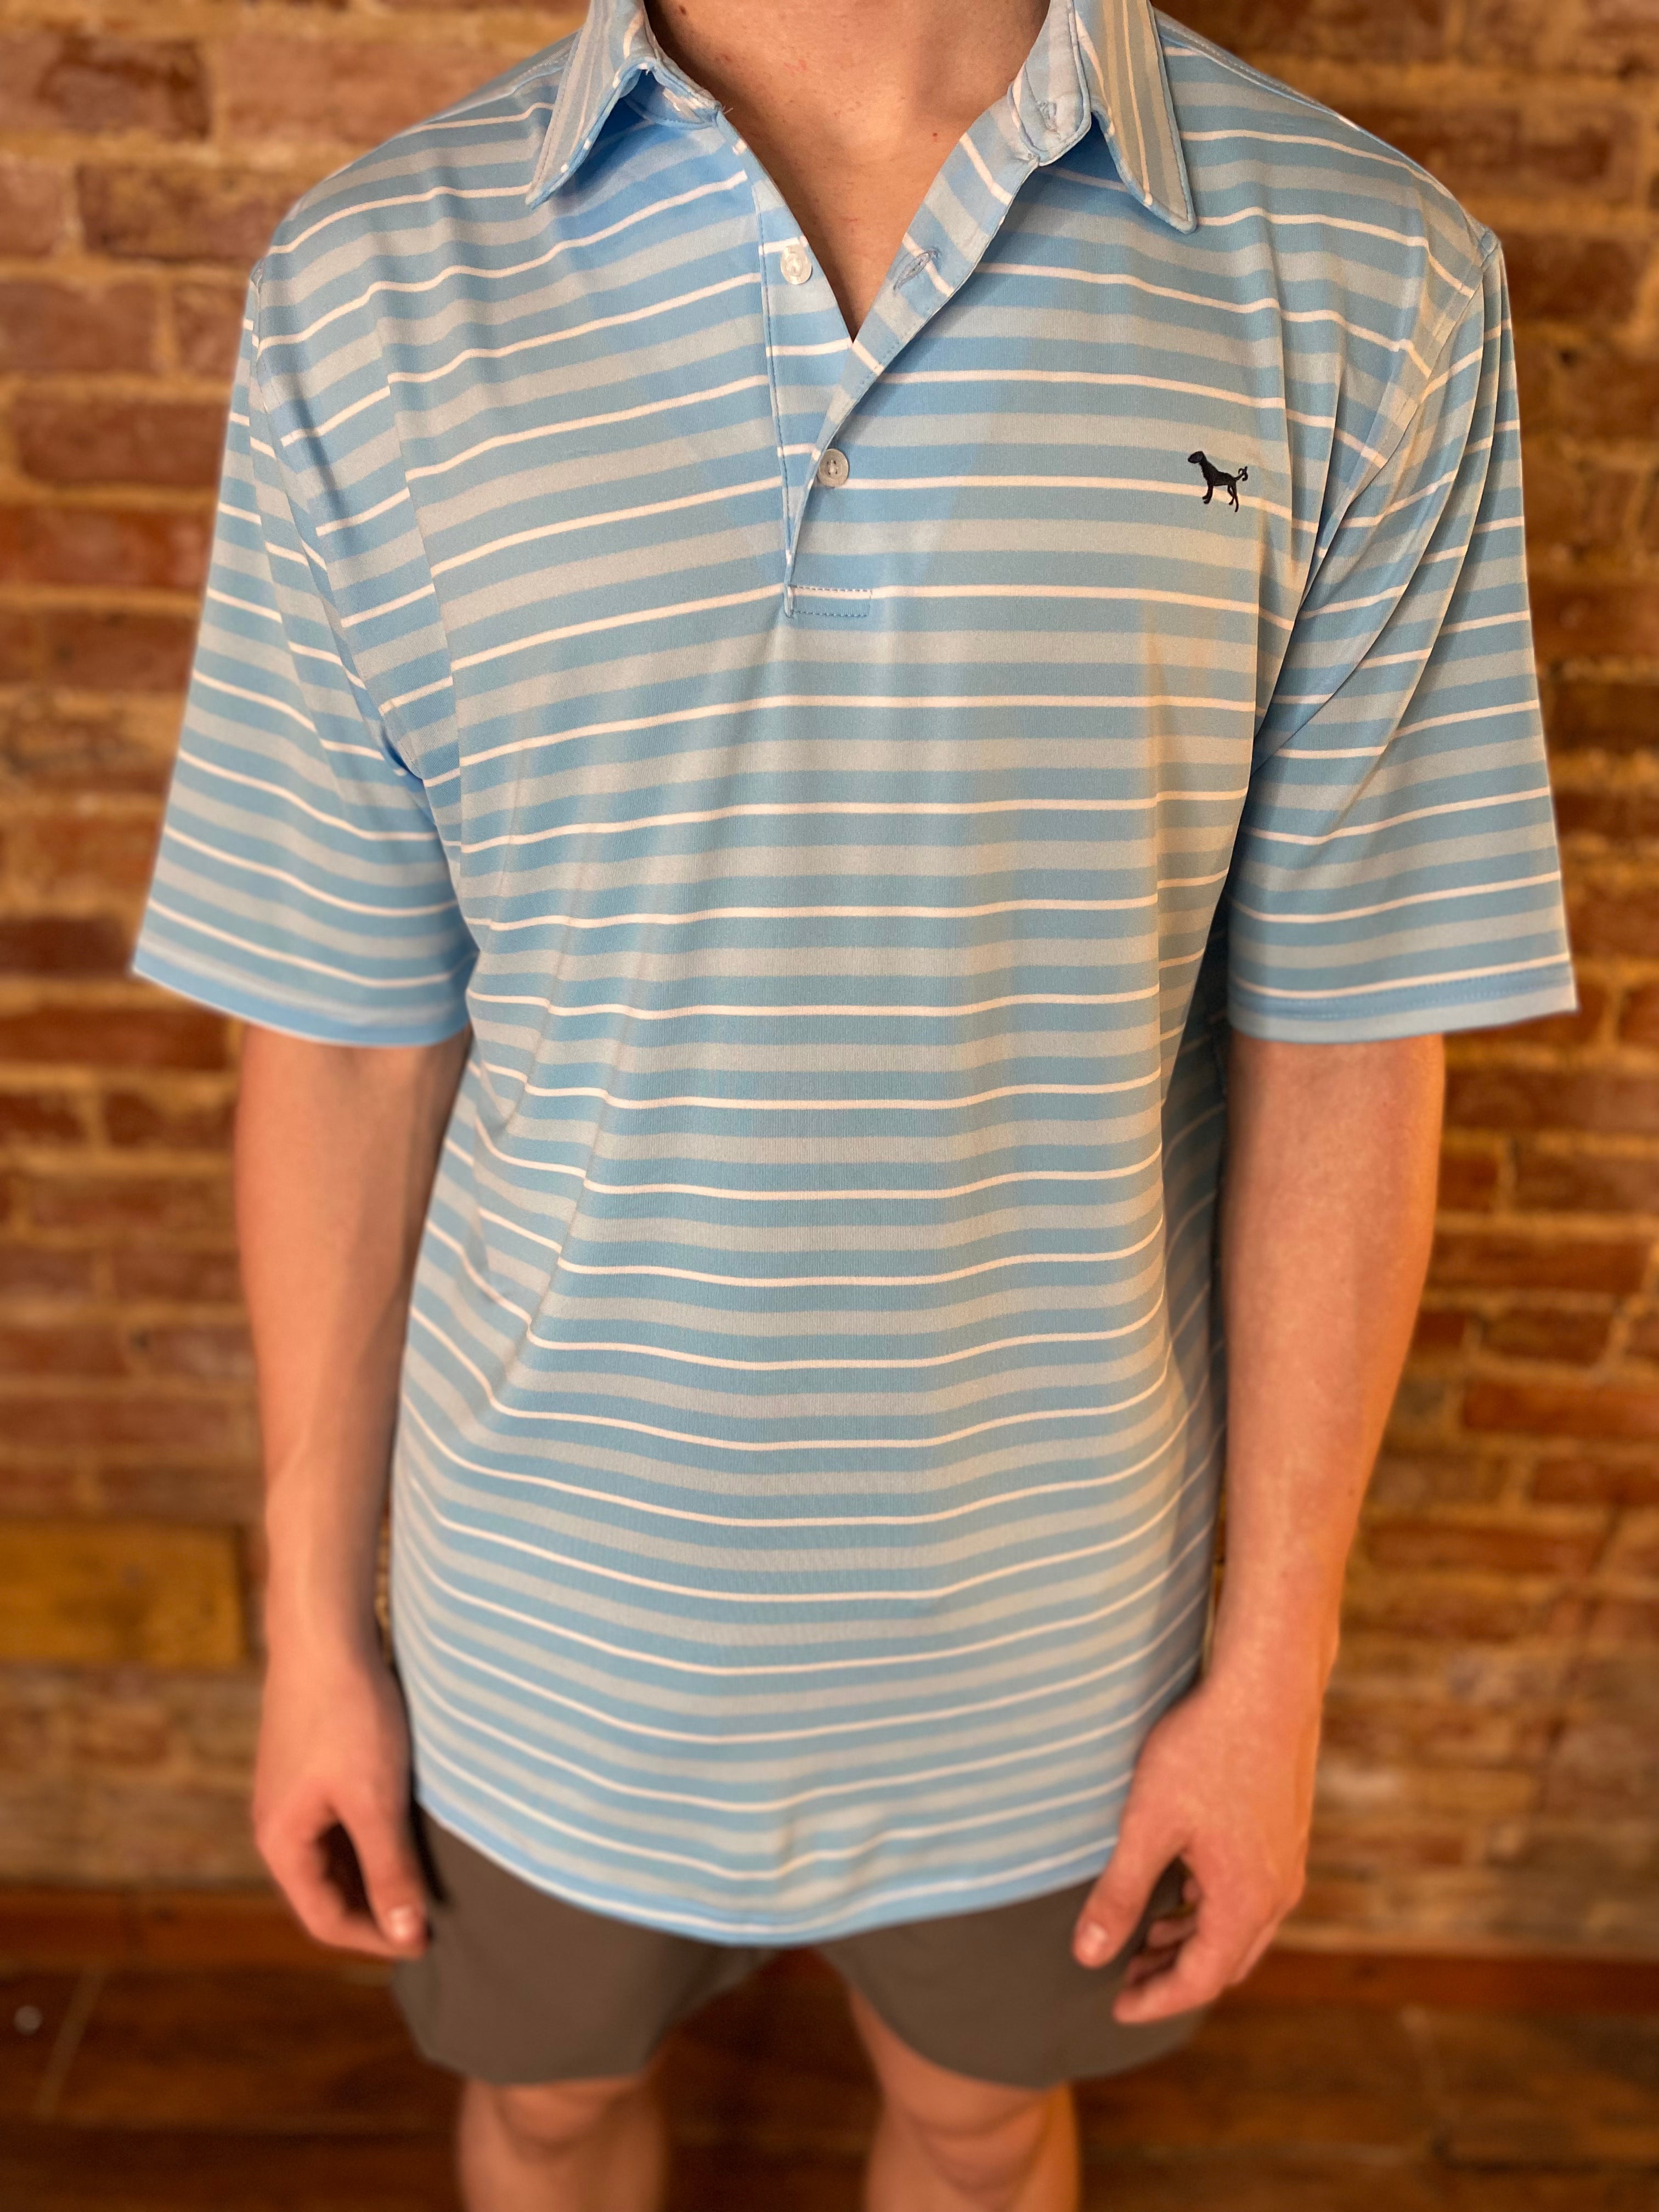 Blue & White Striped Dry Fit Performance Simply Southern Polo Shirt